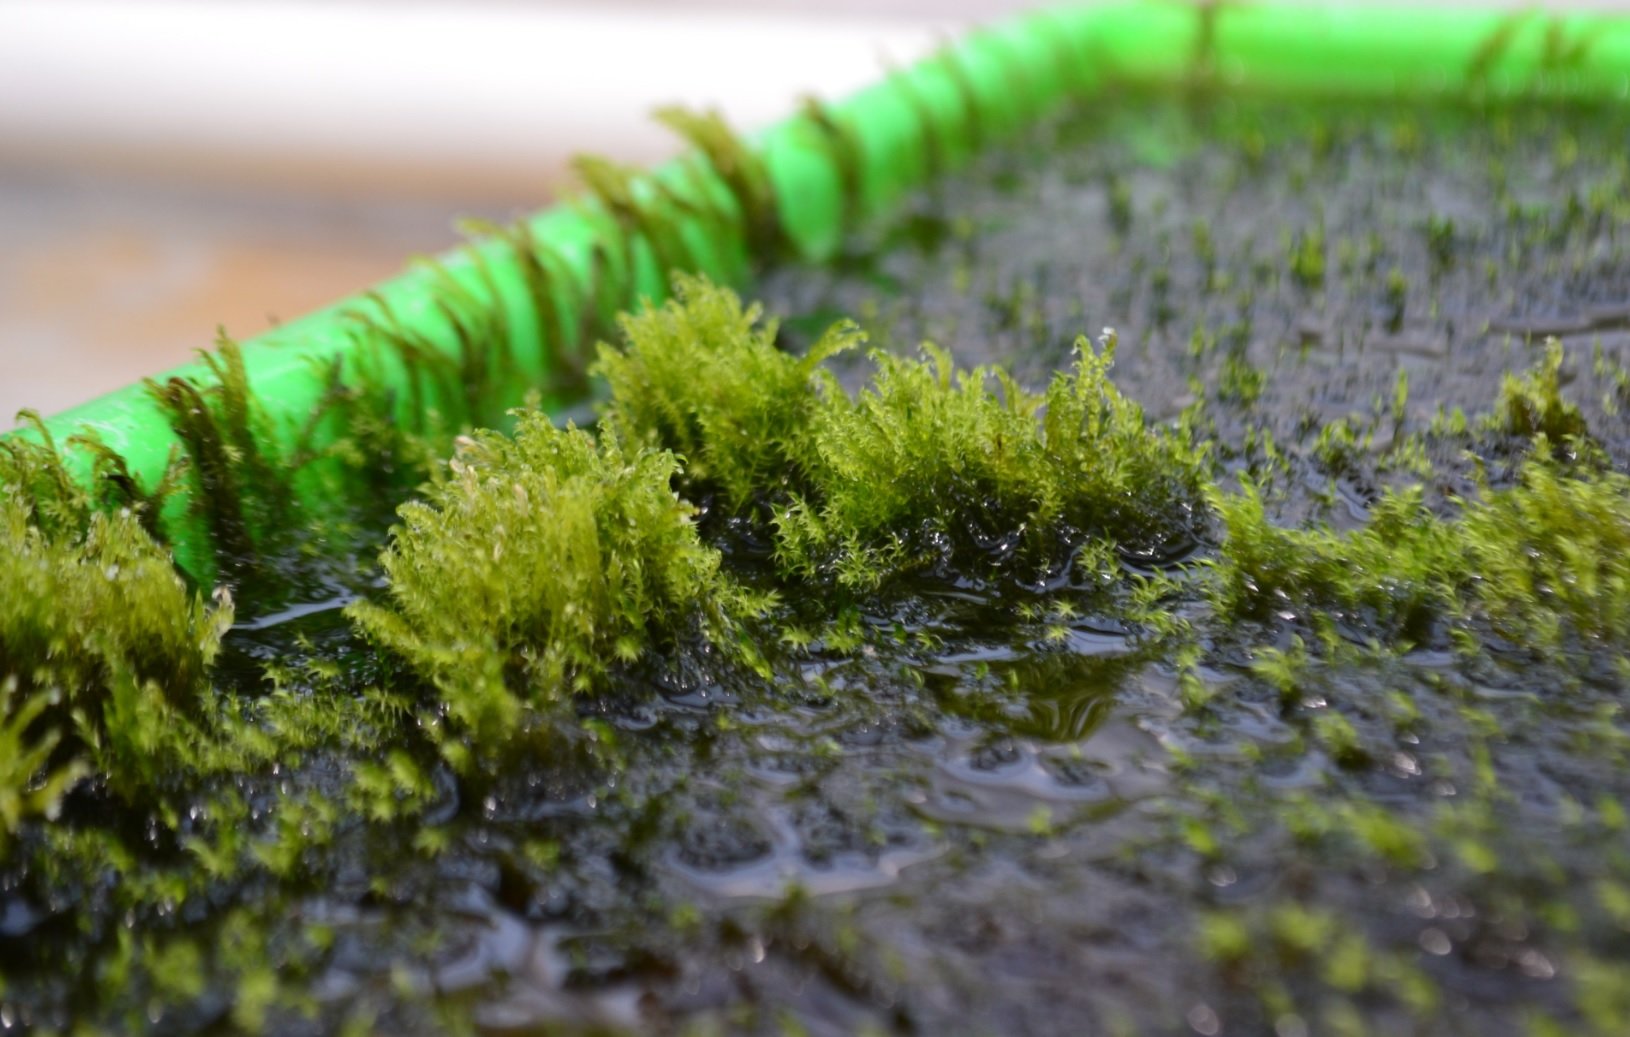 Moss capable of removing arsenic from drinking water discovered.